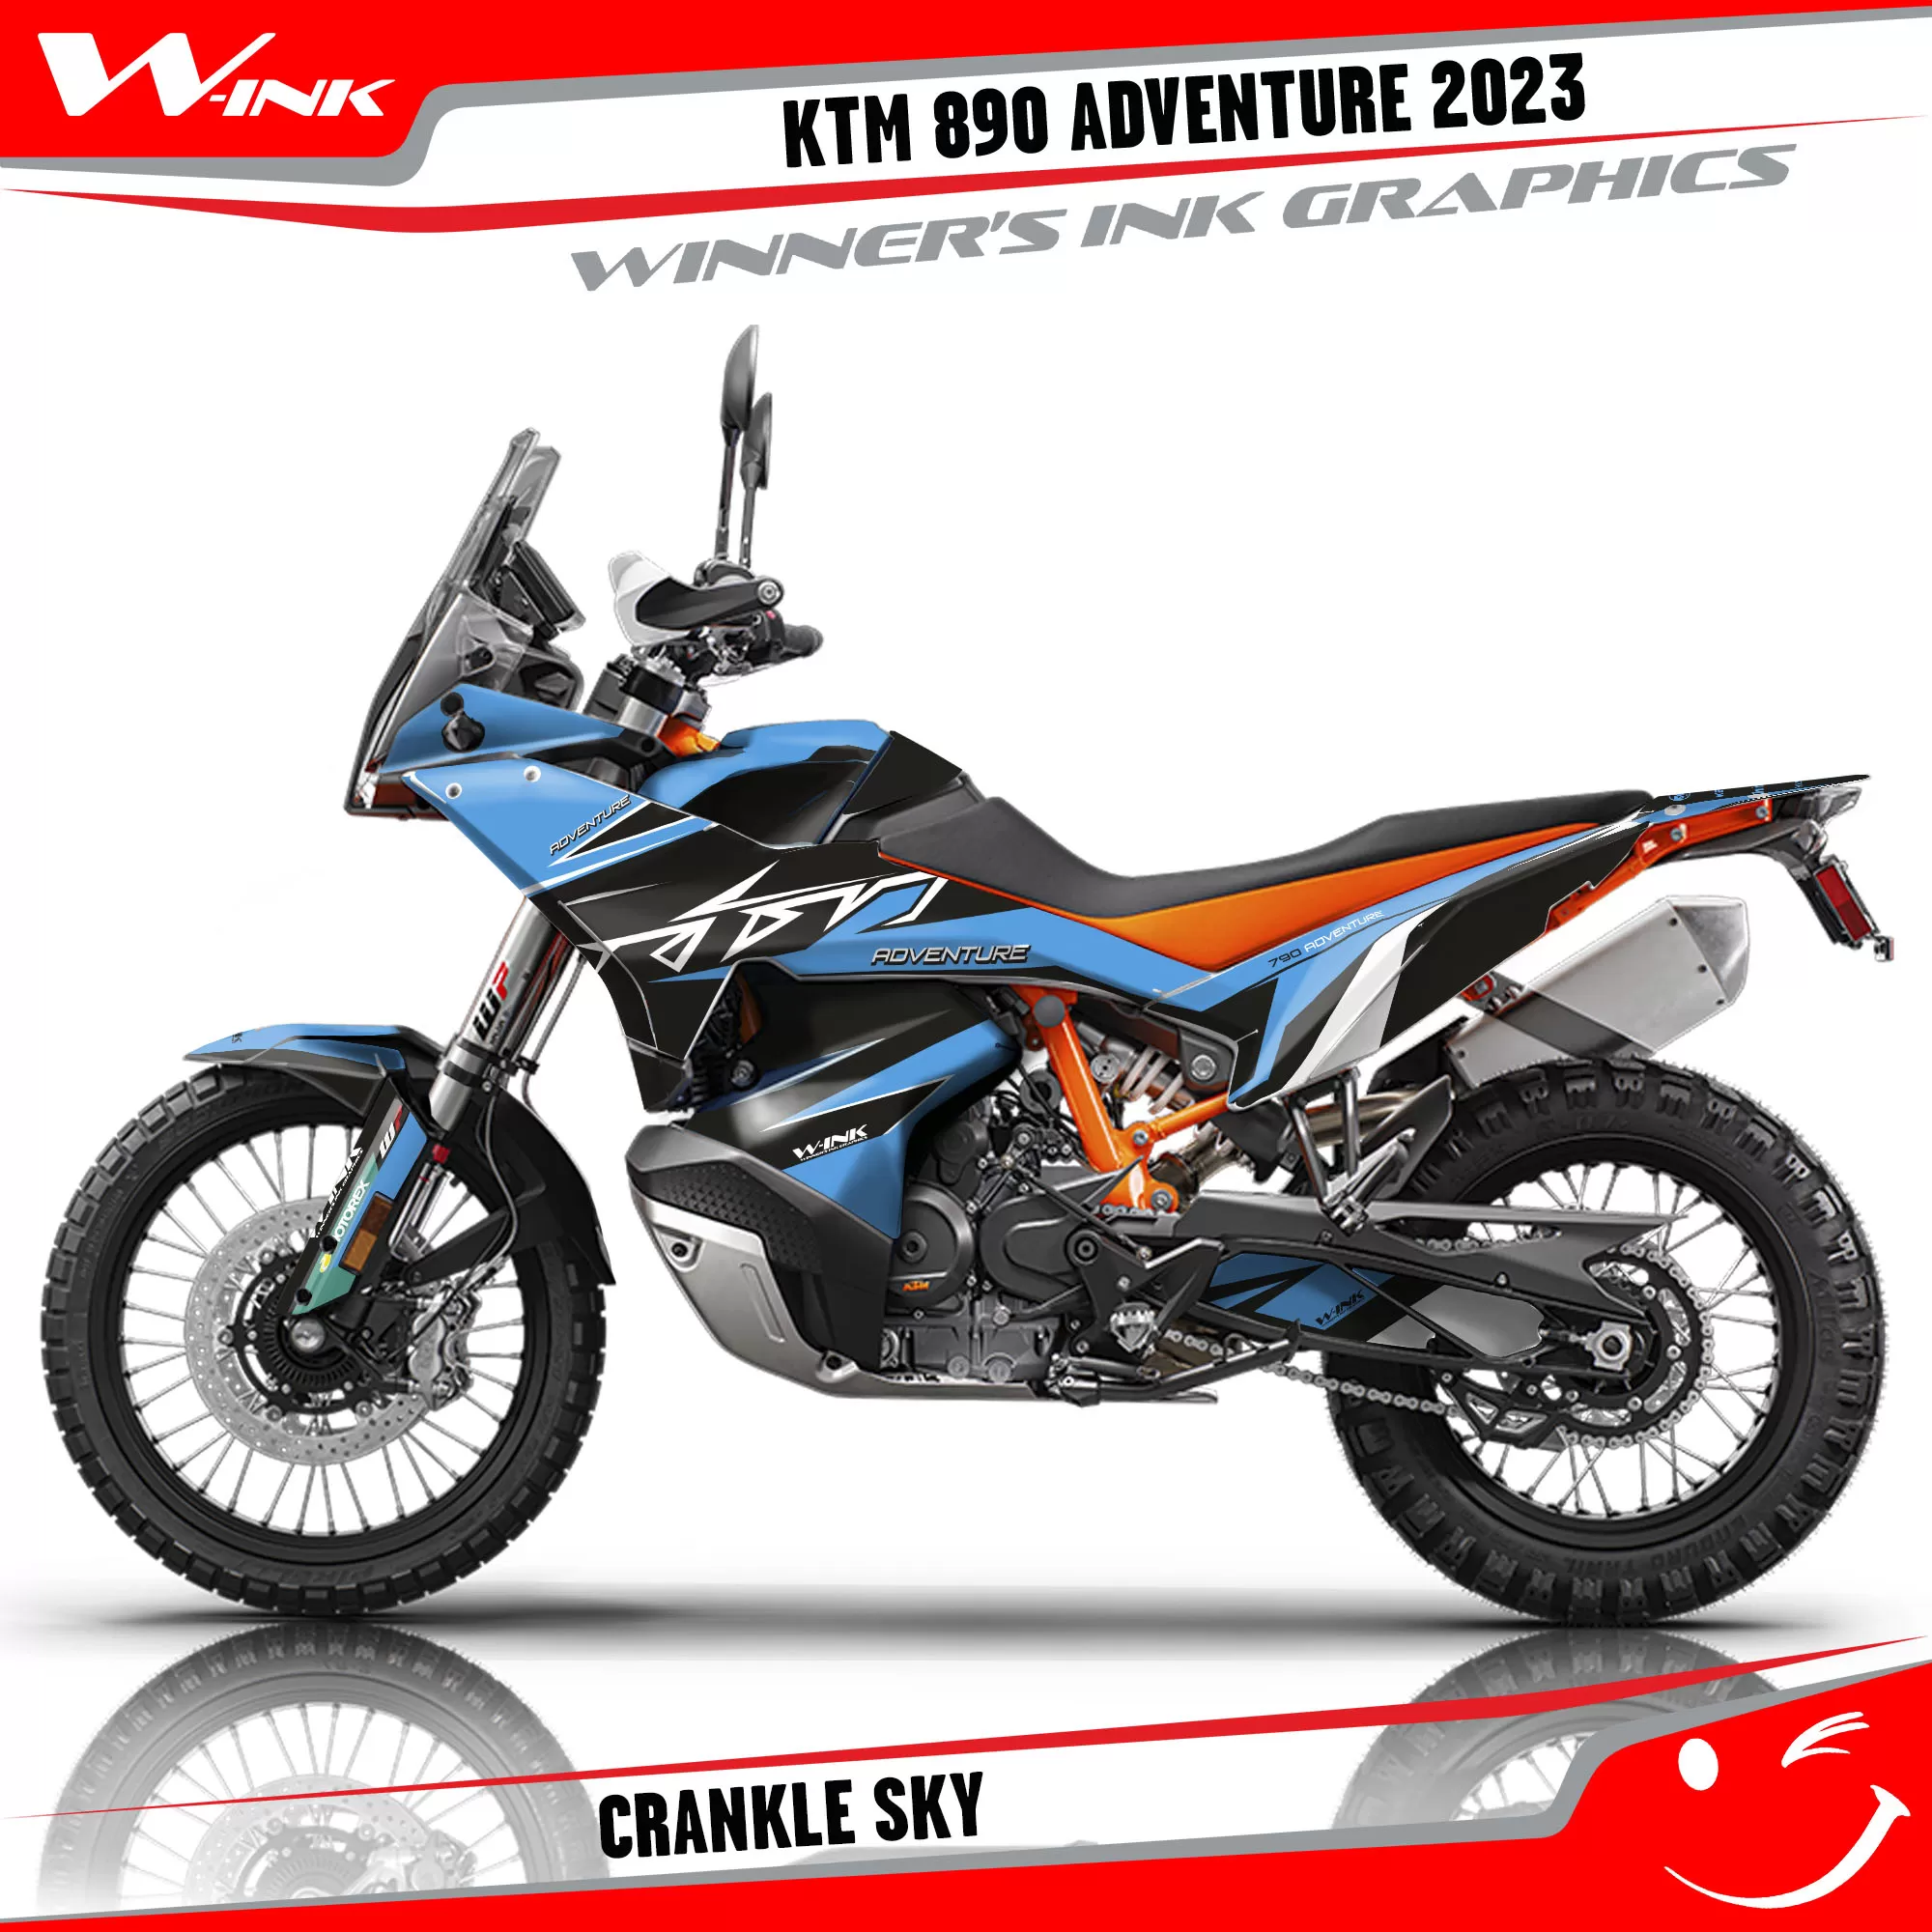 Adventure-890-2023-graphics-kit-and-decals-with-design-Crankle-Black-Sky